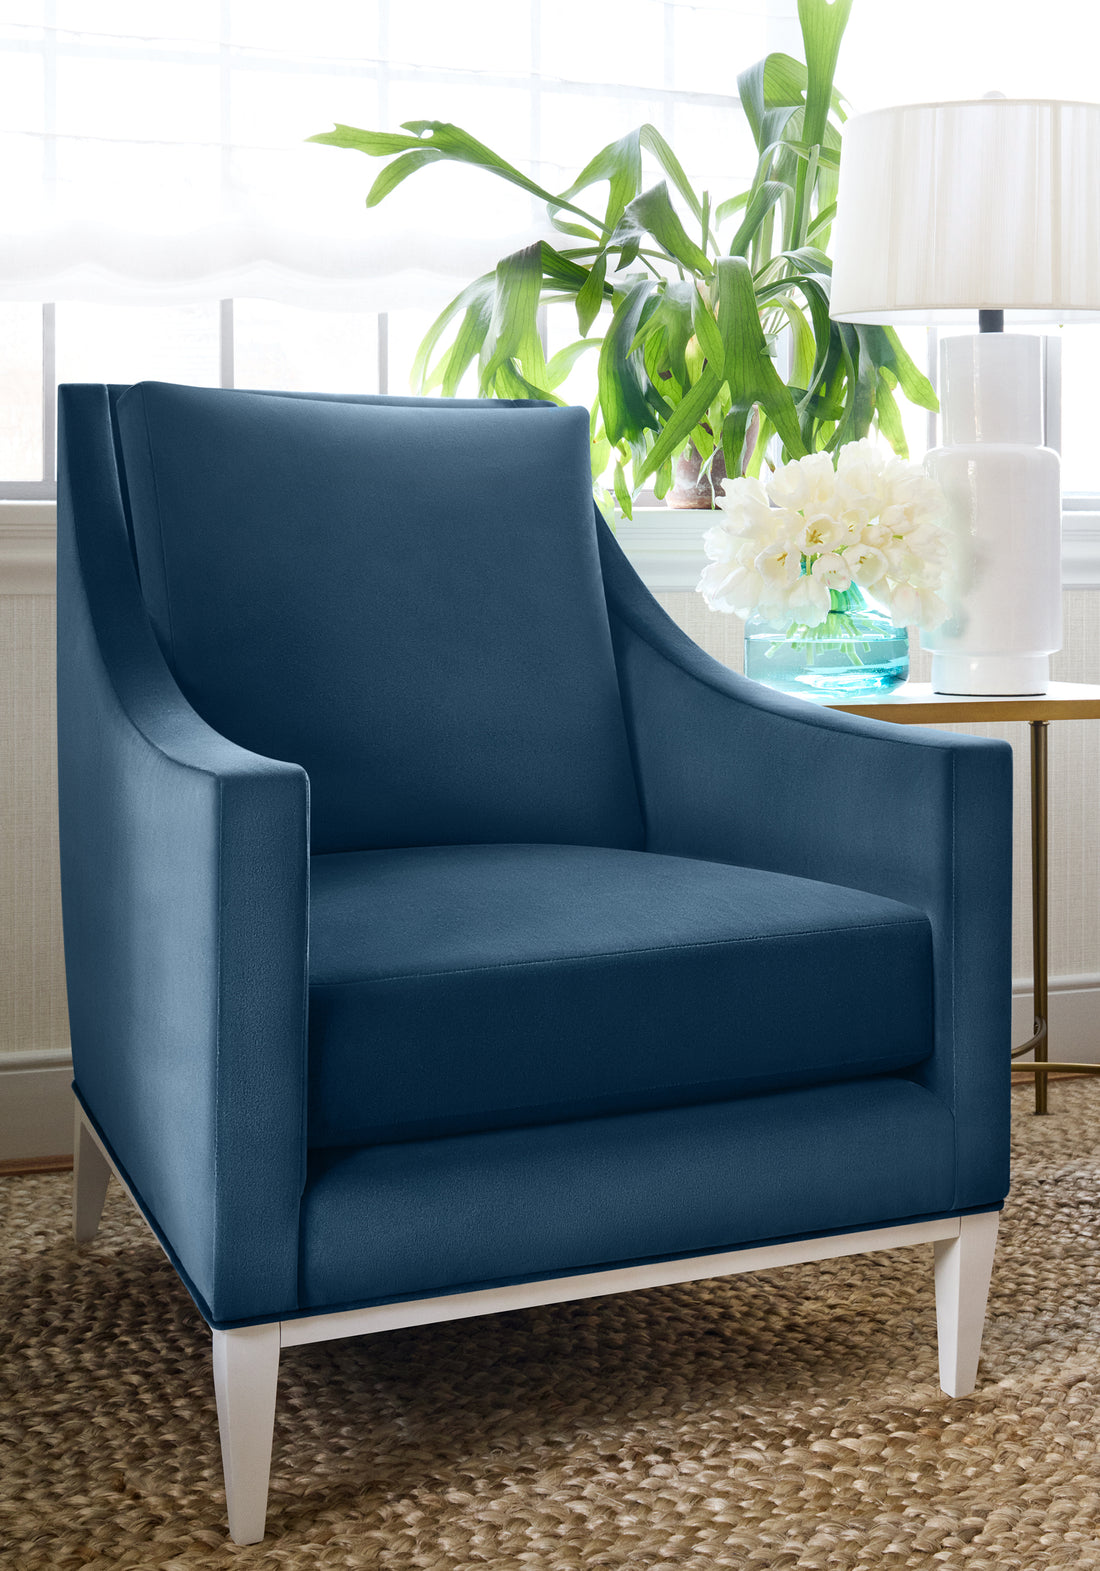 Chair in Lyra Velvet fabric in denim color - pattern number W8915 - by Thibaut in the Lyra Velvets collection